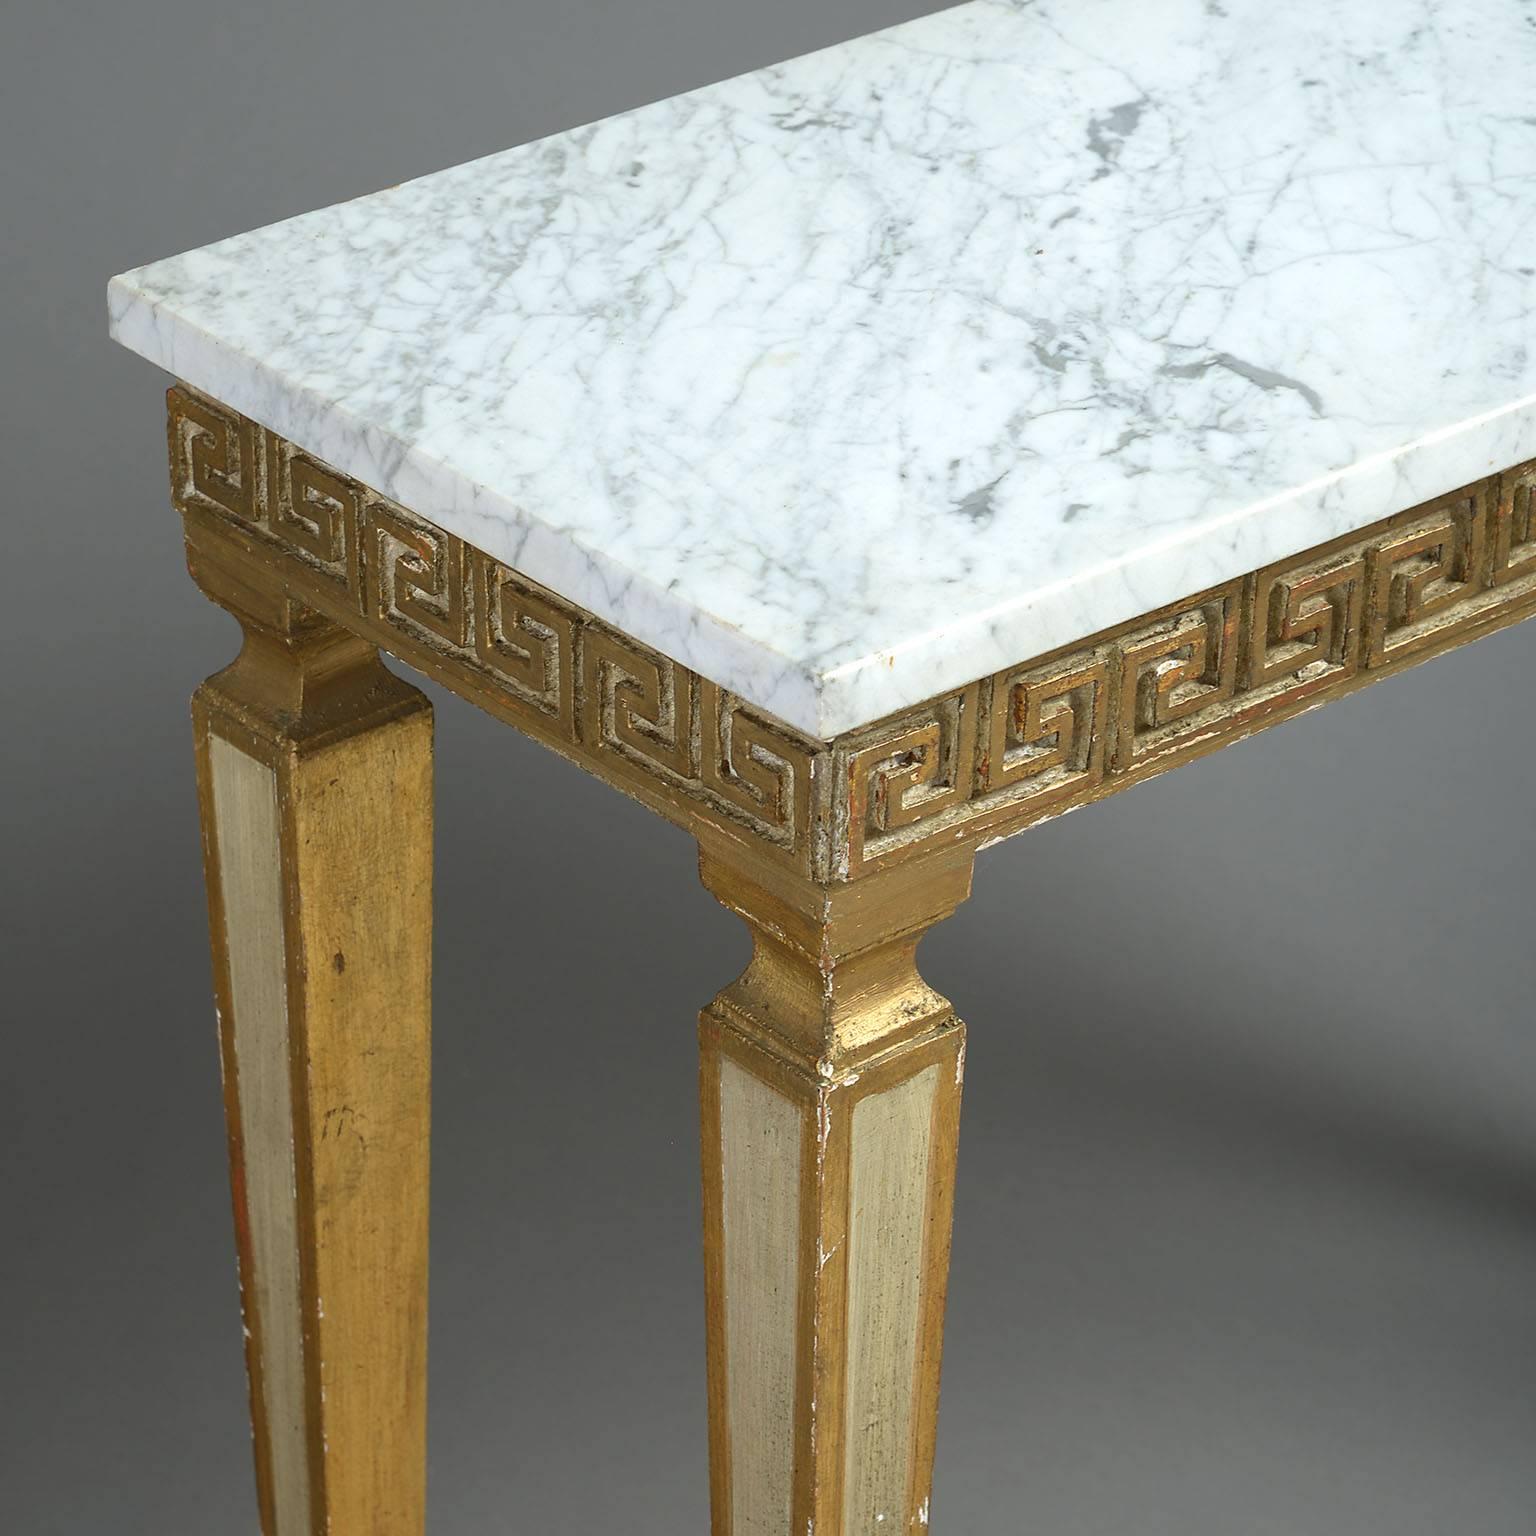 Neoclassical Revival 20th Century Italian Neoclassical Console Table